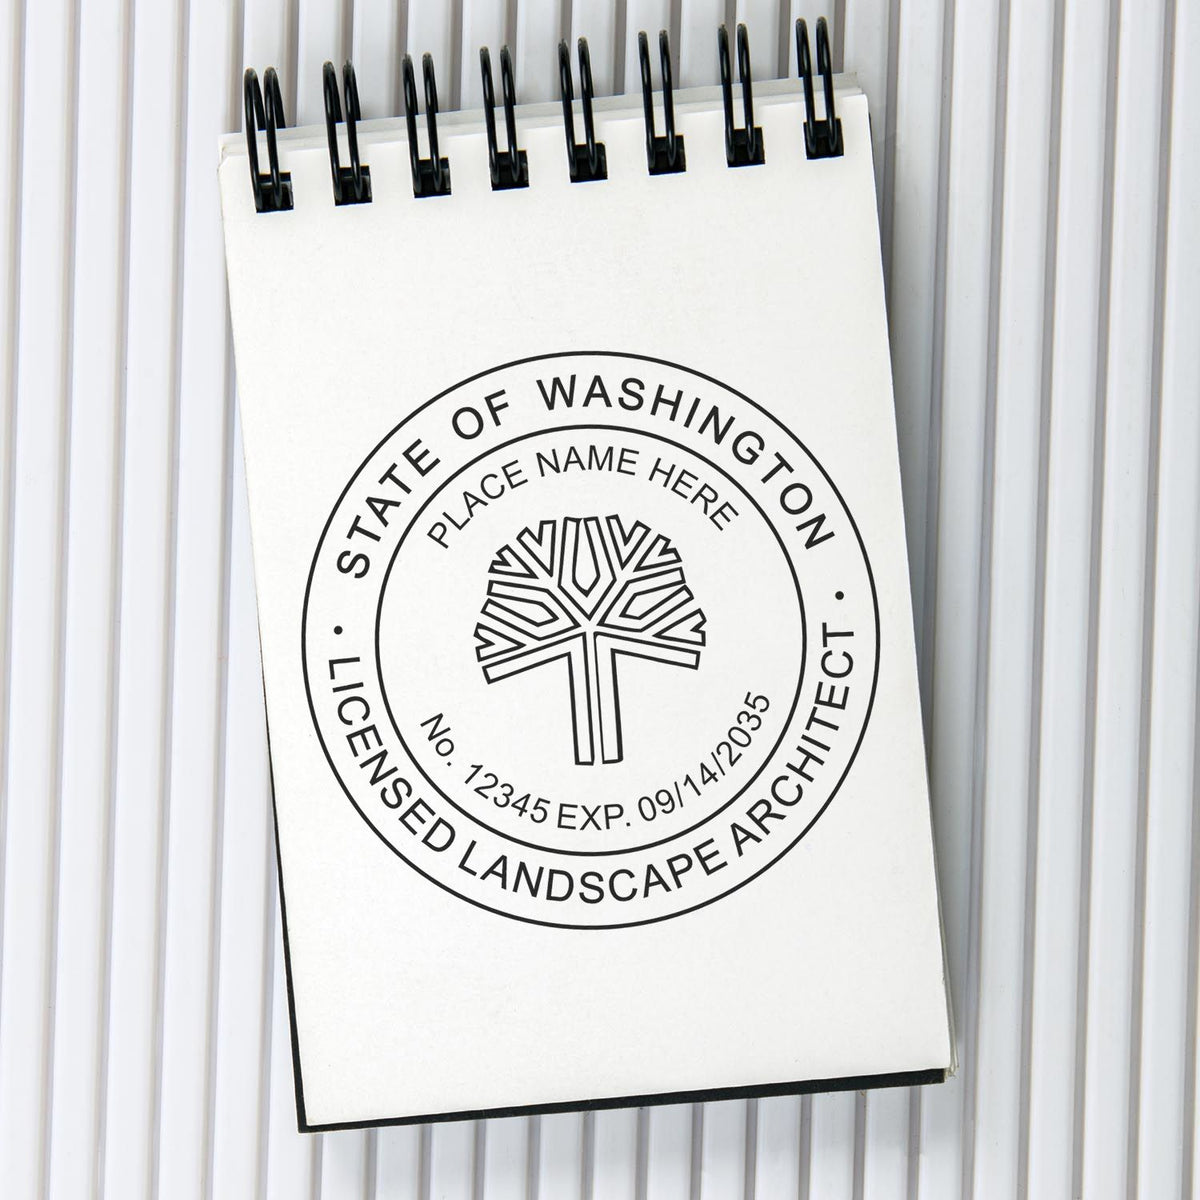 Slim Pre-Inked Washington Landscape Architect Seal Stamp in use photo showing a stamped imprint of the Slim Pre-Inked Washington Landscape Architect Seal Stamp